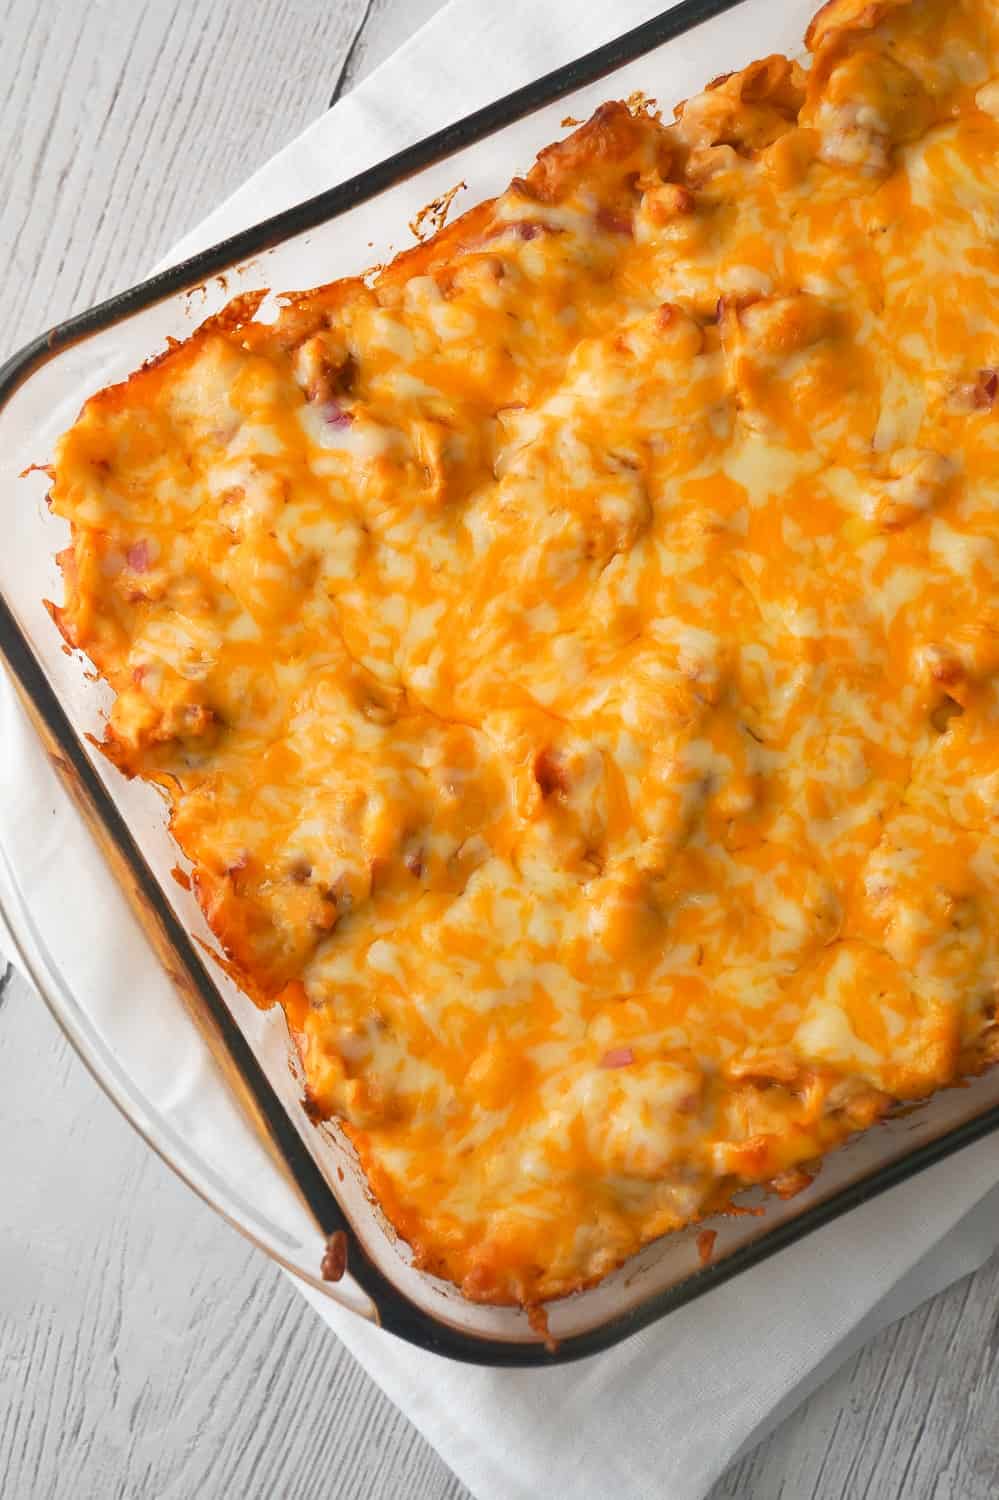 BBQ Chicken Tortellini Casserole is an easy dinner recipe using rotisserie chicken. This baked tortellini is loaded with bacon, chicken, red onions, BBQ sauce and cheddar cheese.